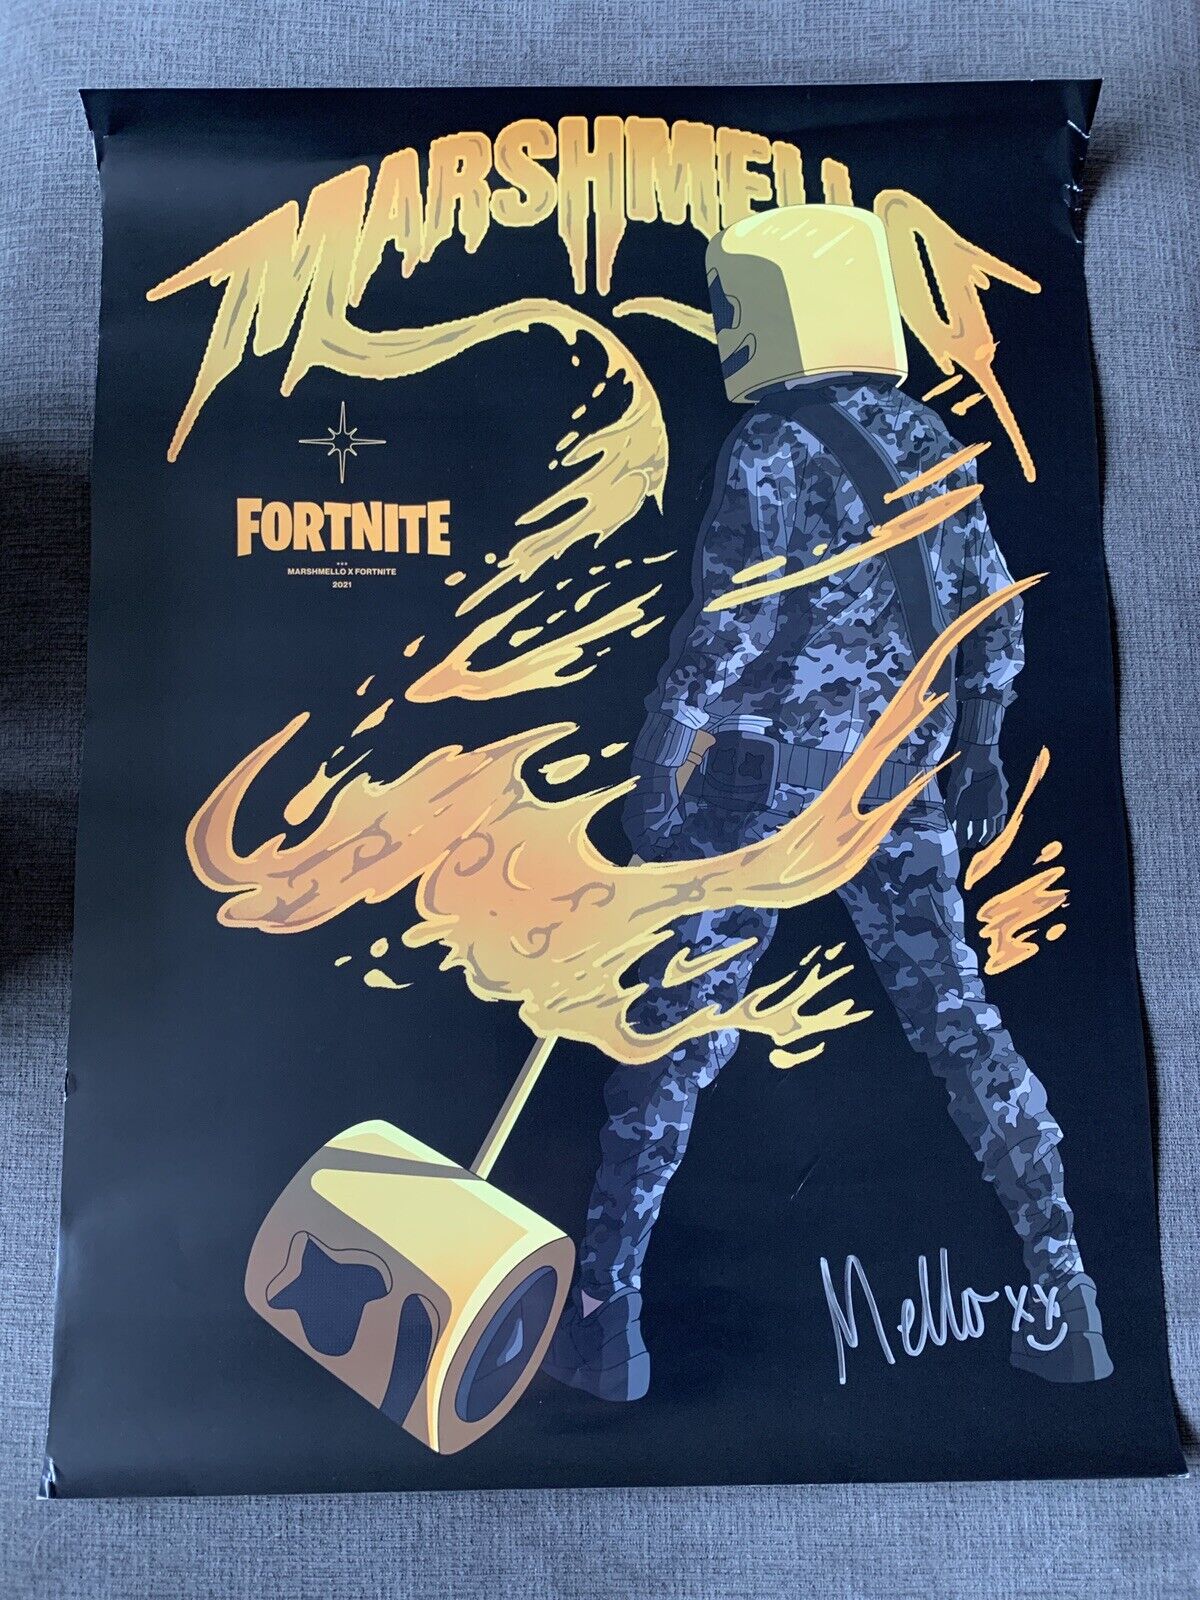 Fortnite X Marshmello Autographed Poster 1 Of 500 Limited Edition In Hand